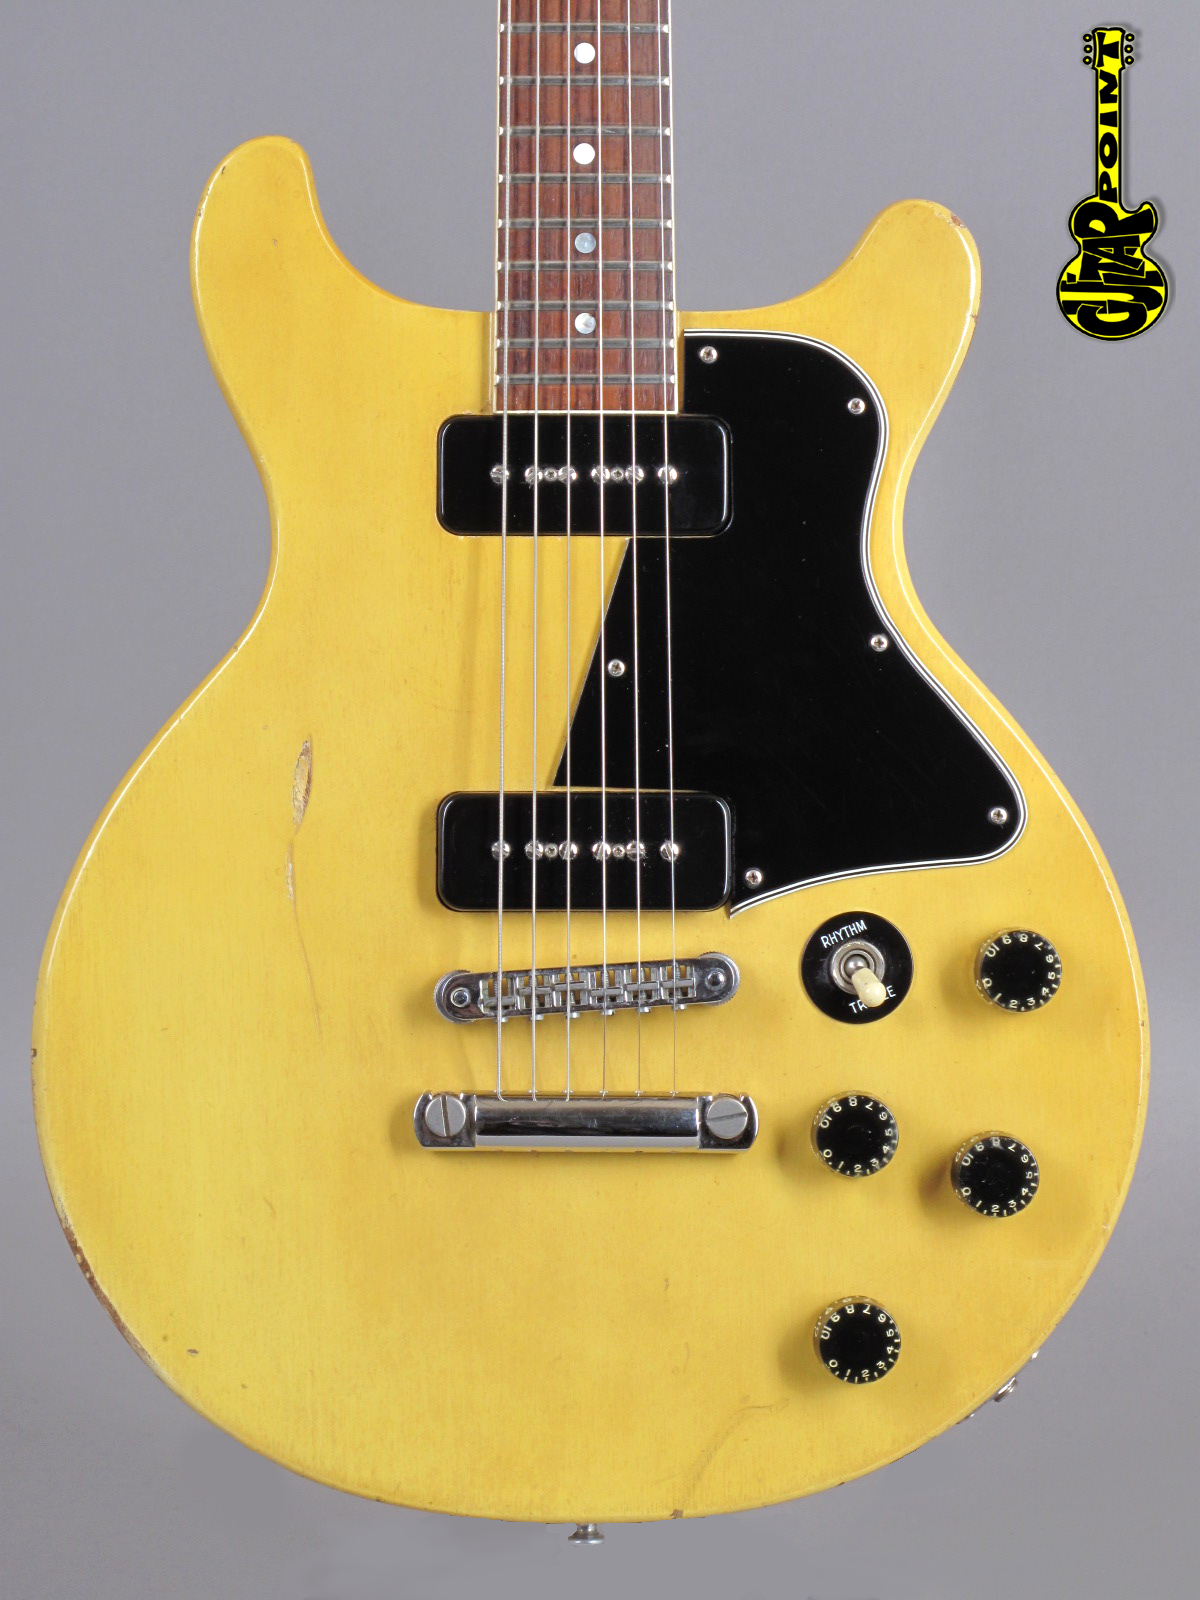 1977 Gibson Limited Edition Les Paul Special Doublecut Reissue Tv Yellow Guitarpoint